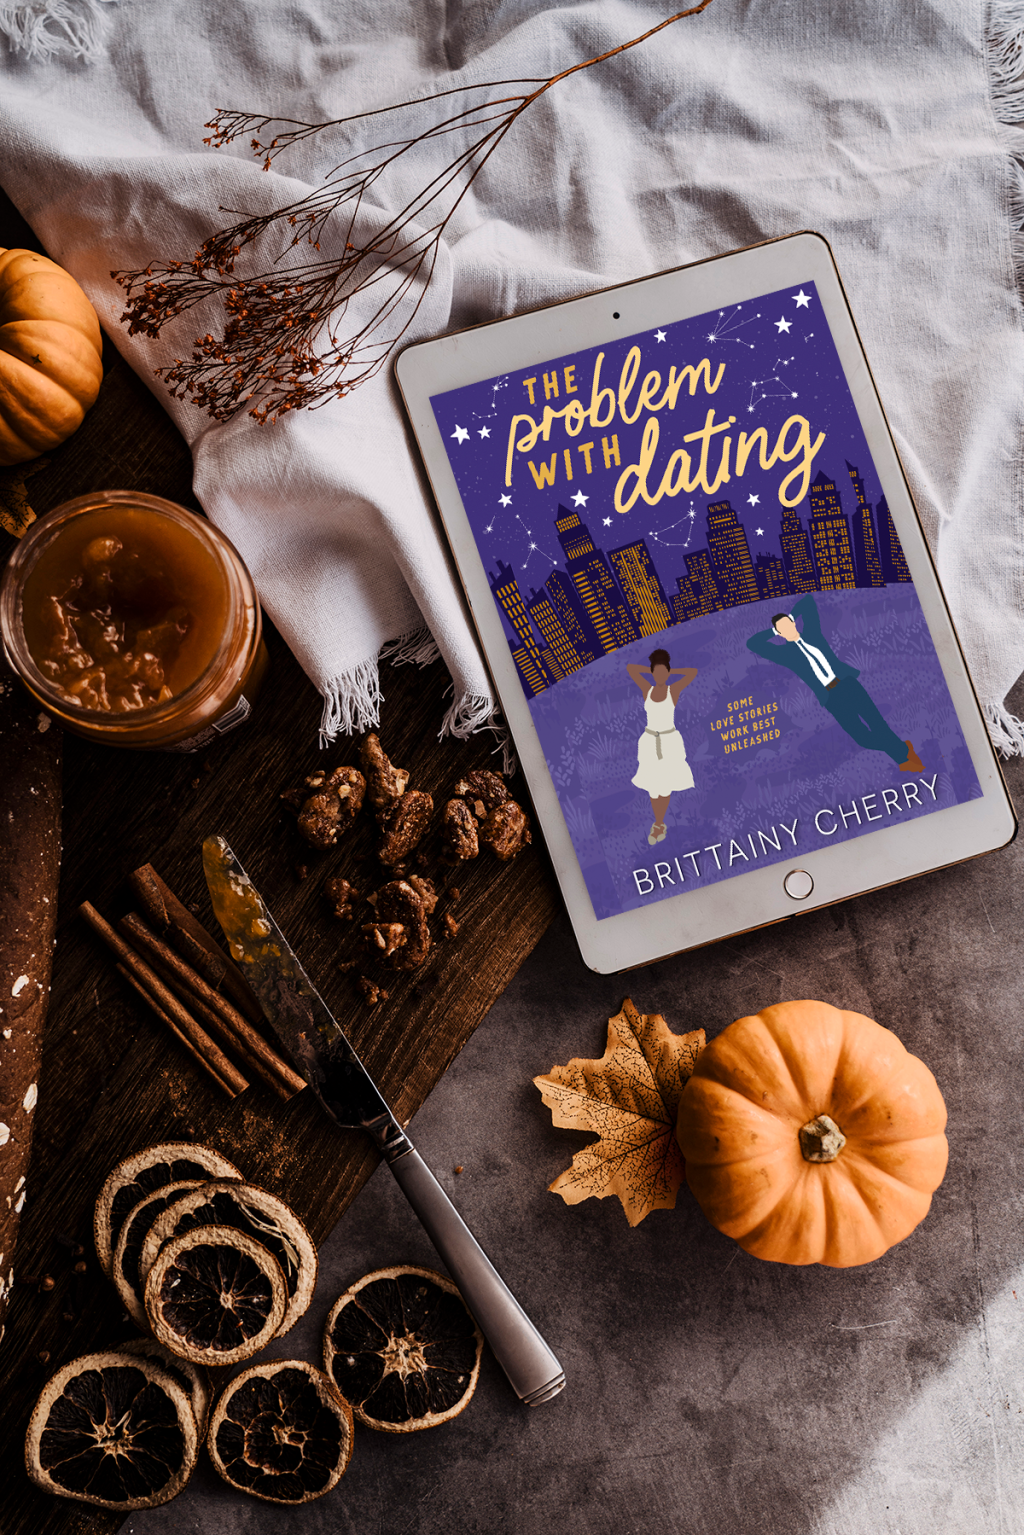 The Problem with Dating by Brittainy Cherry (Release Day)